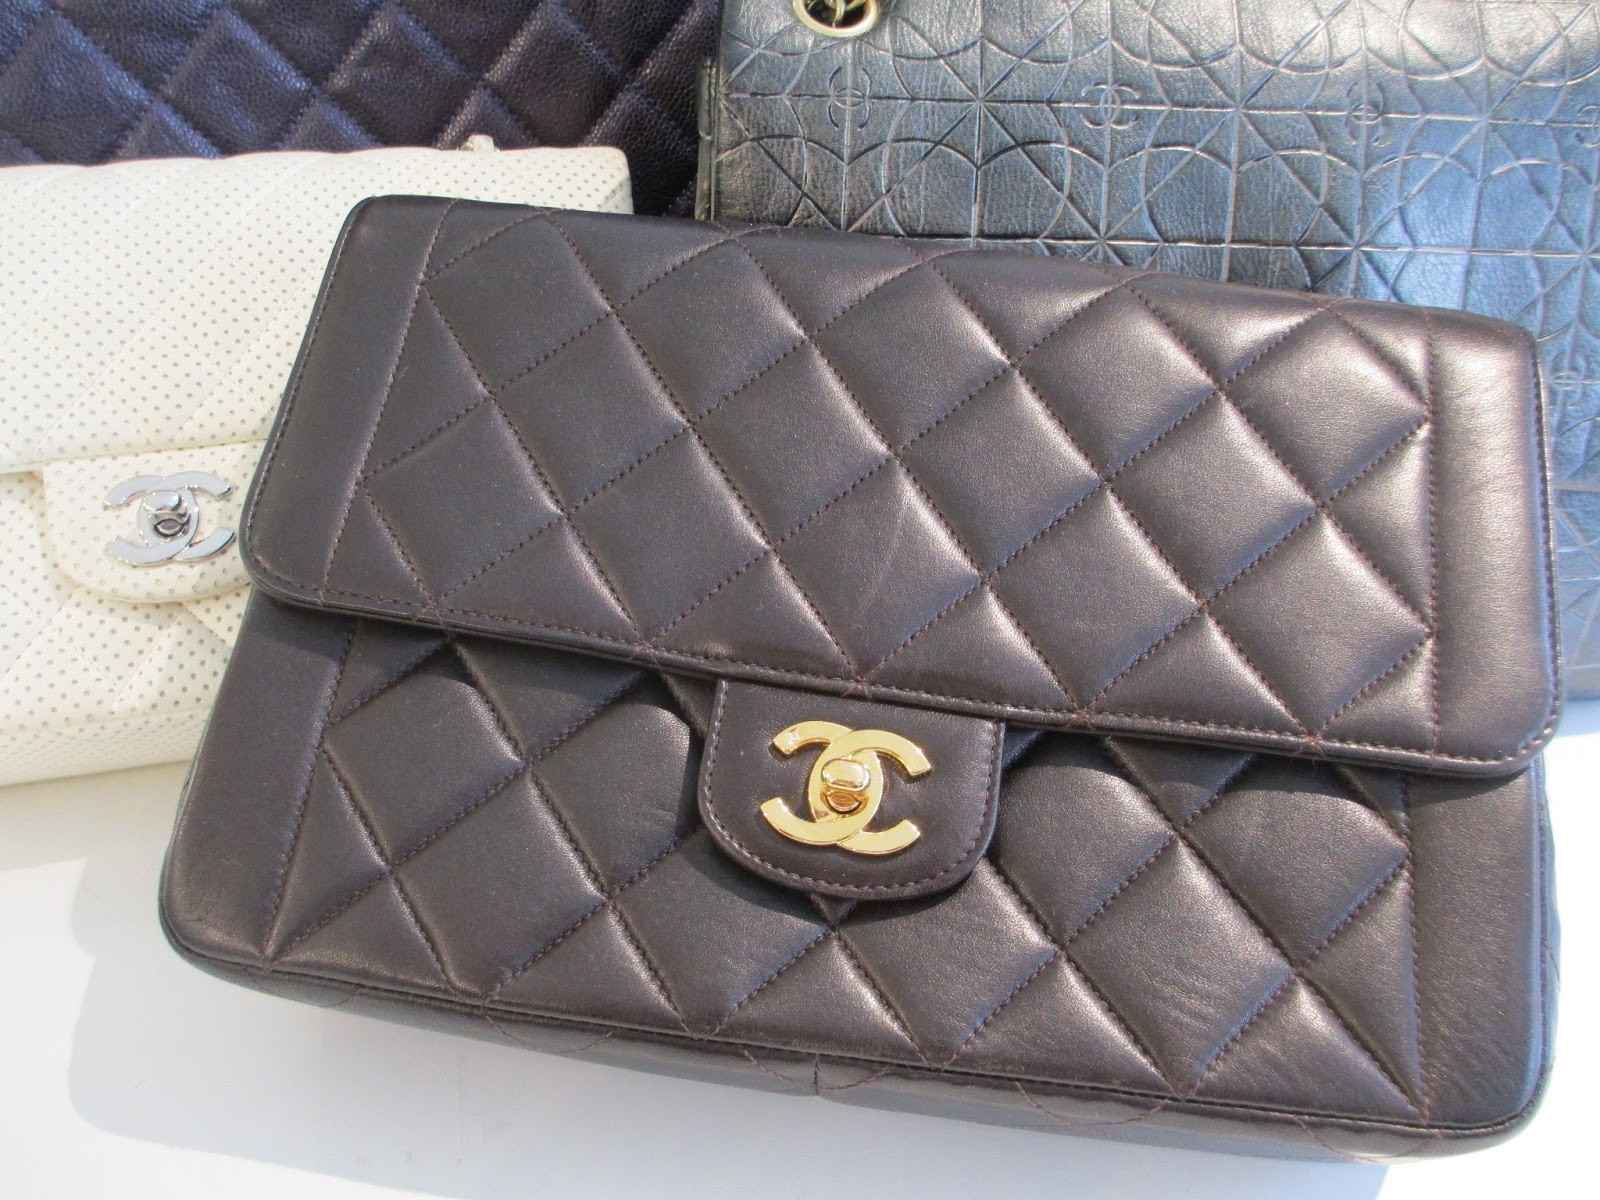 Vancouver Luxury Designer Consignment Shop 二手奢侈品寄卖店: Authentic Luxury Pre  Owned Chanel Handbags ~ Buy, Sell, Consign